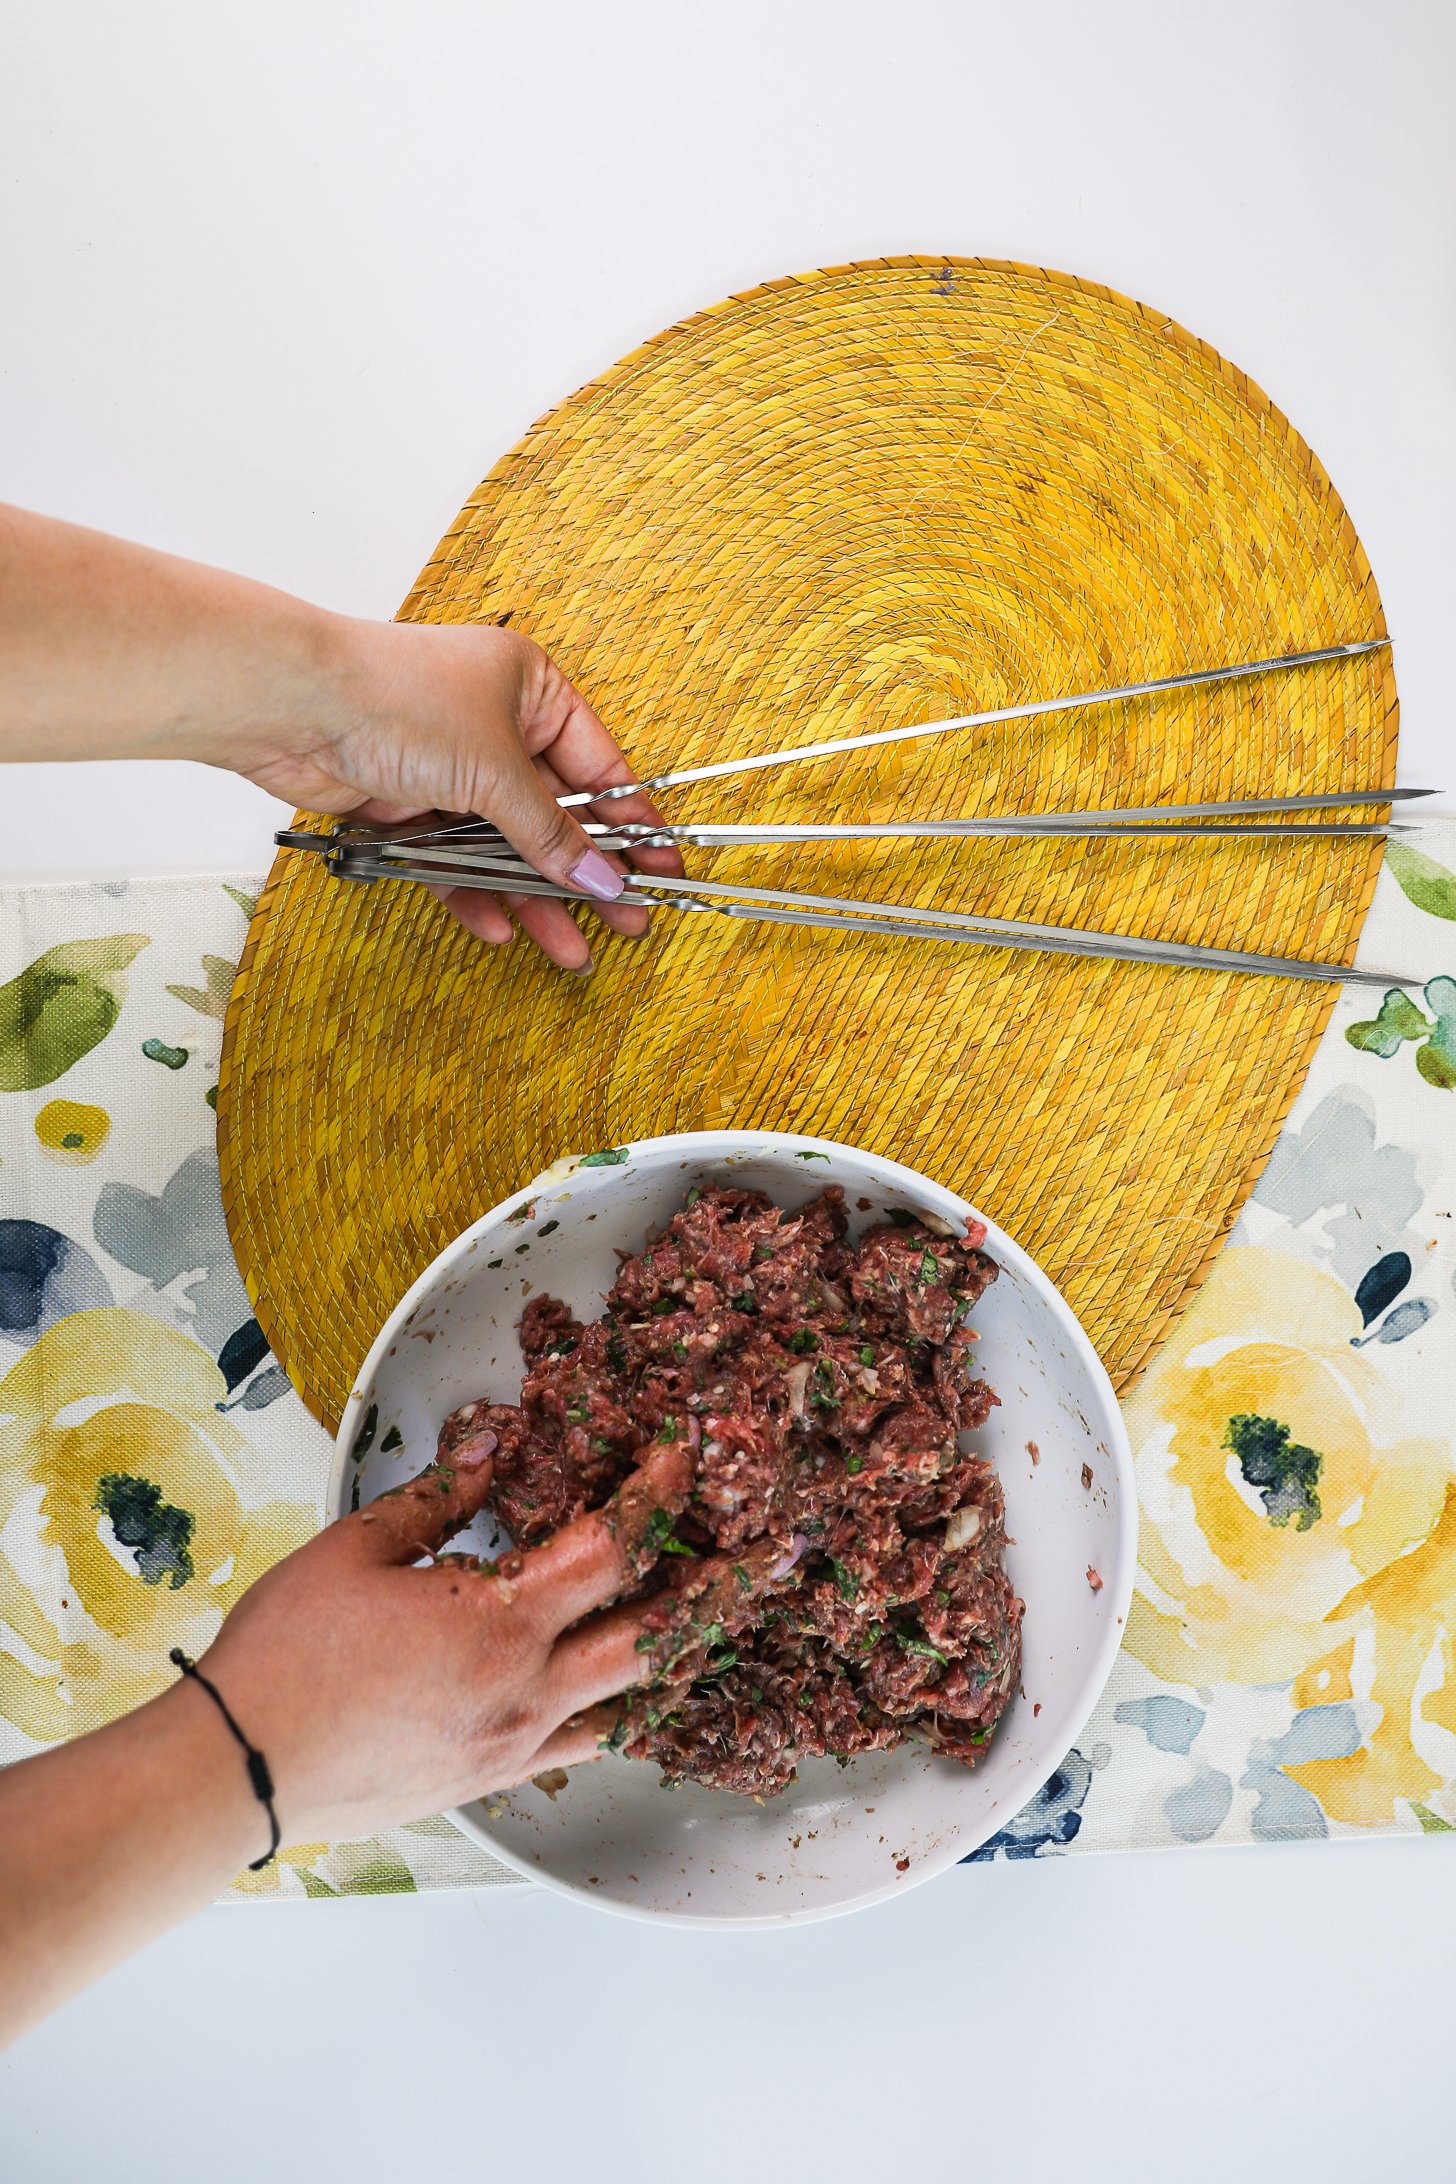 One hand submerged in a bowl of raw minced beef and the other hand holding metal skewers.